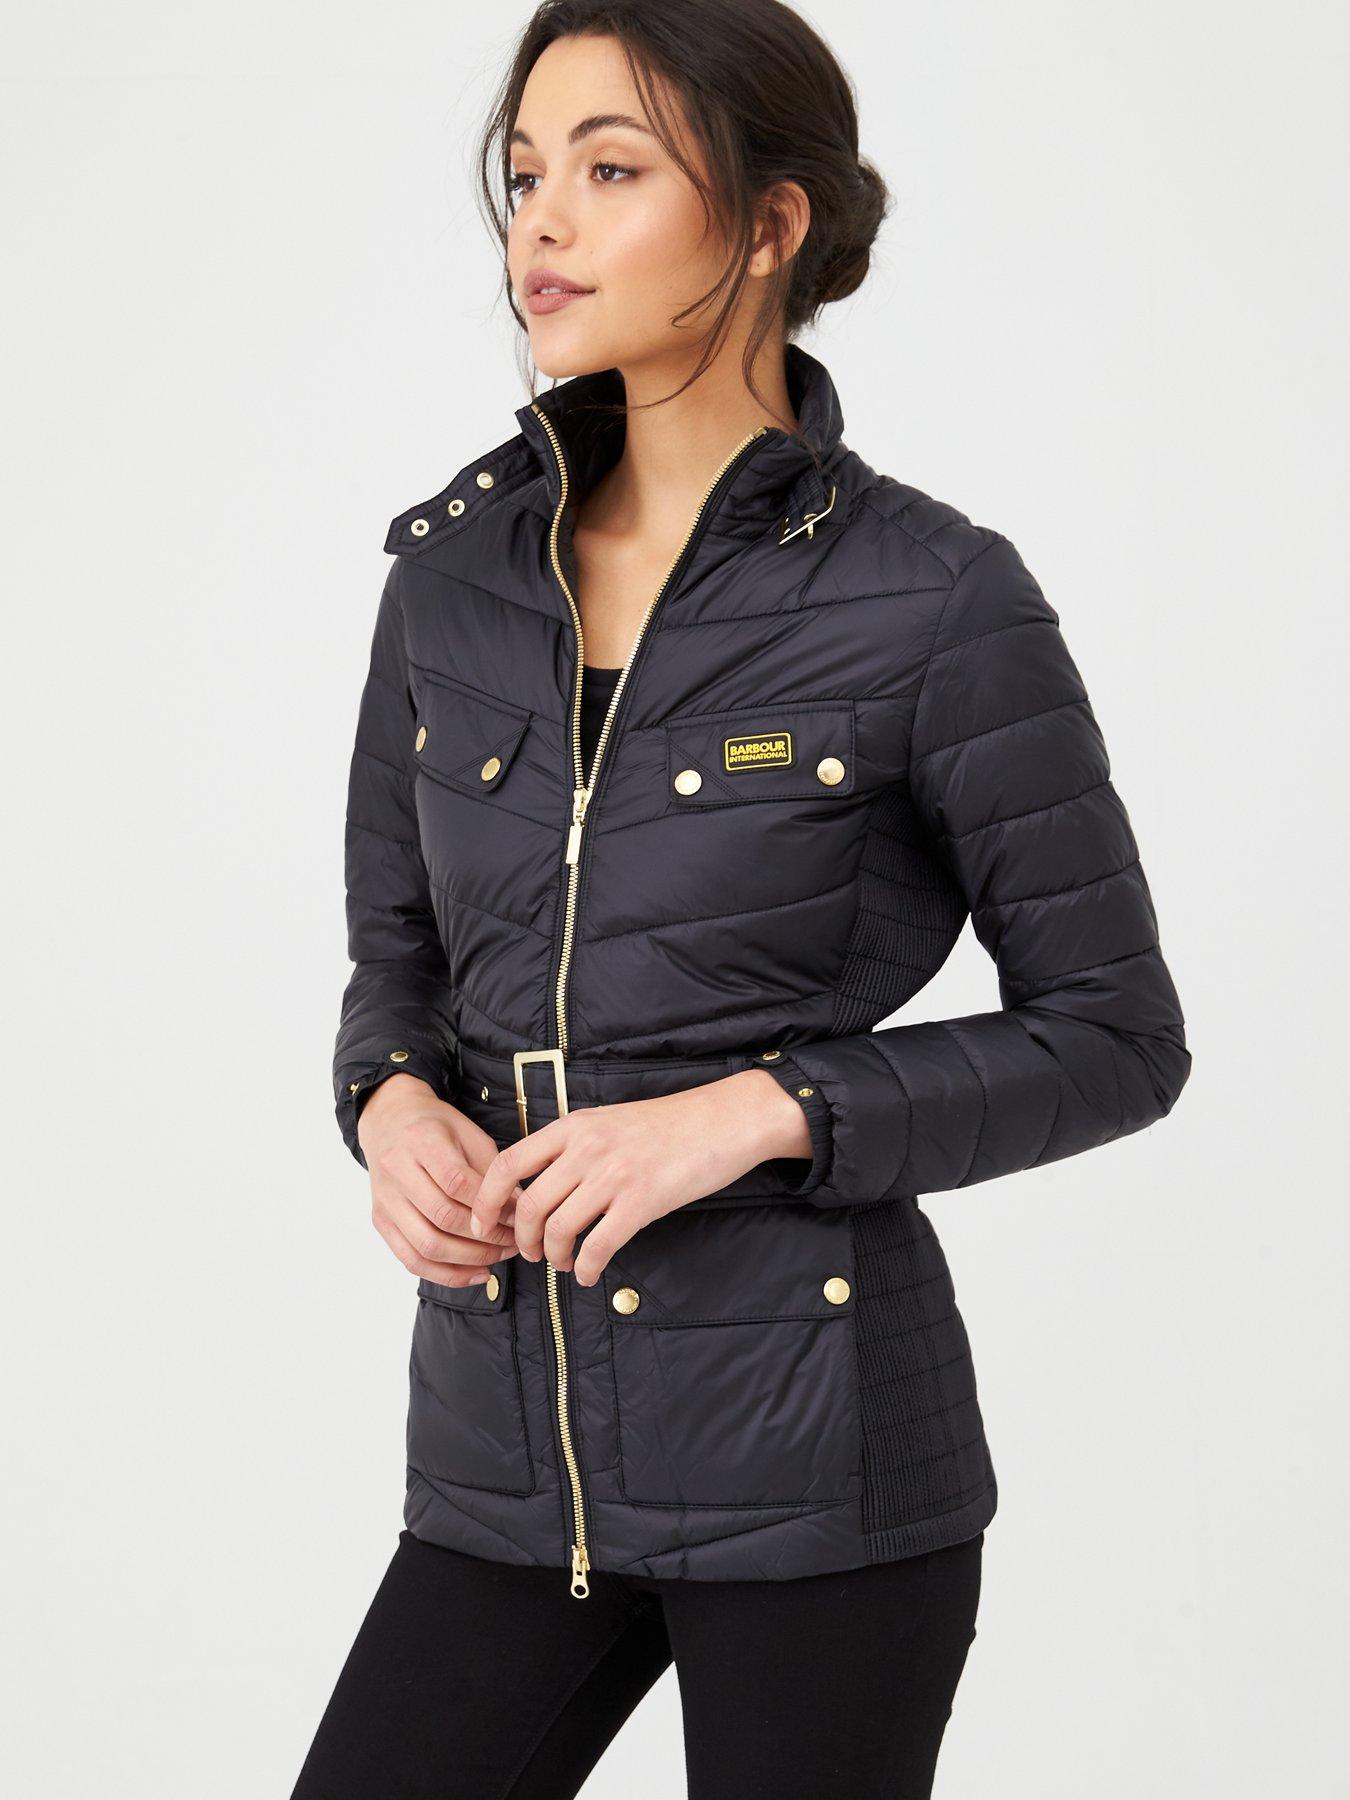 womens barbour puffer jacket